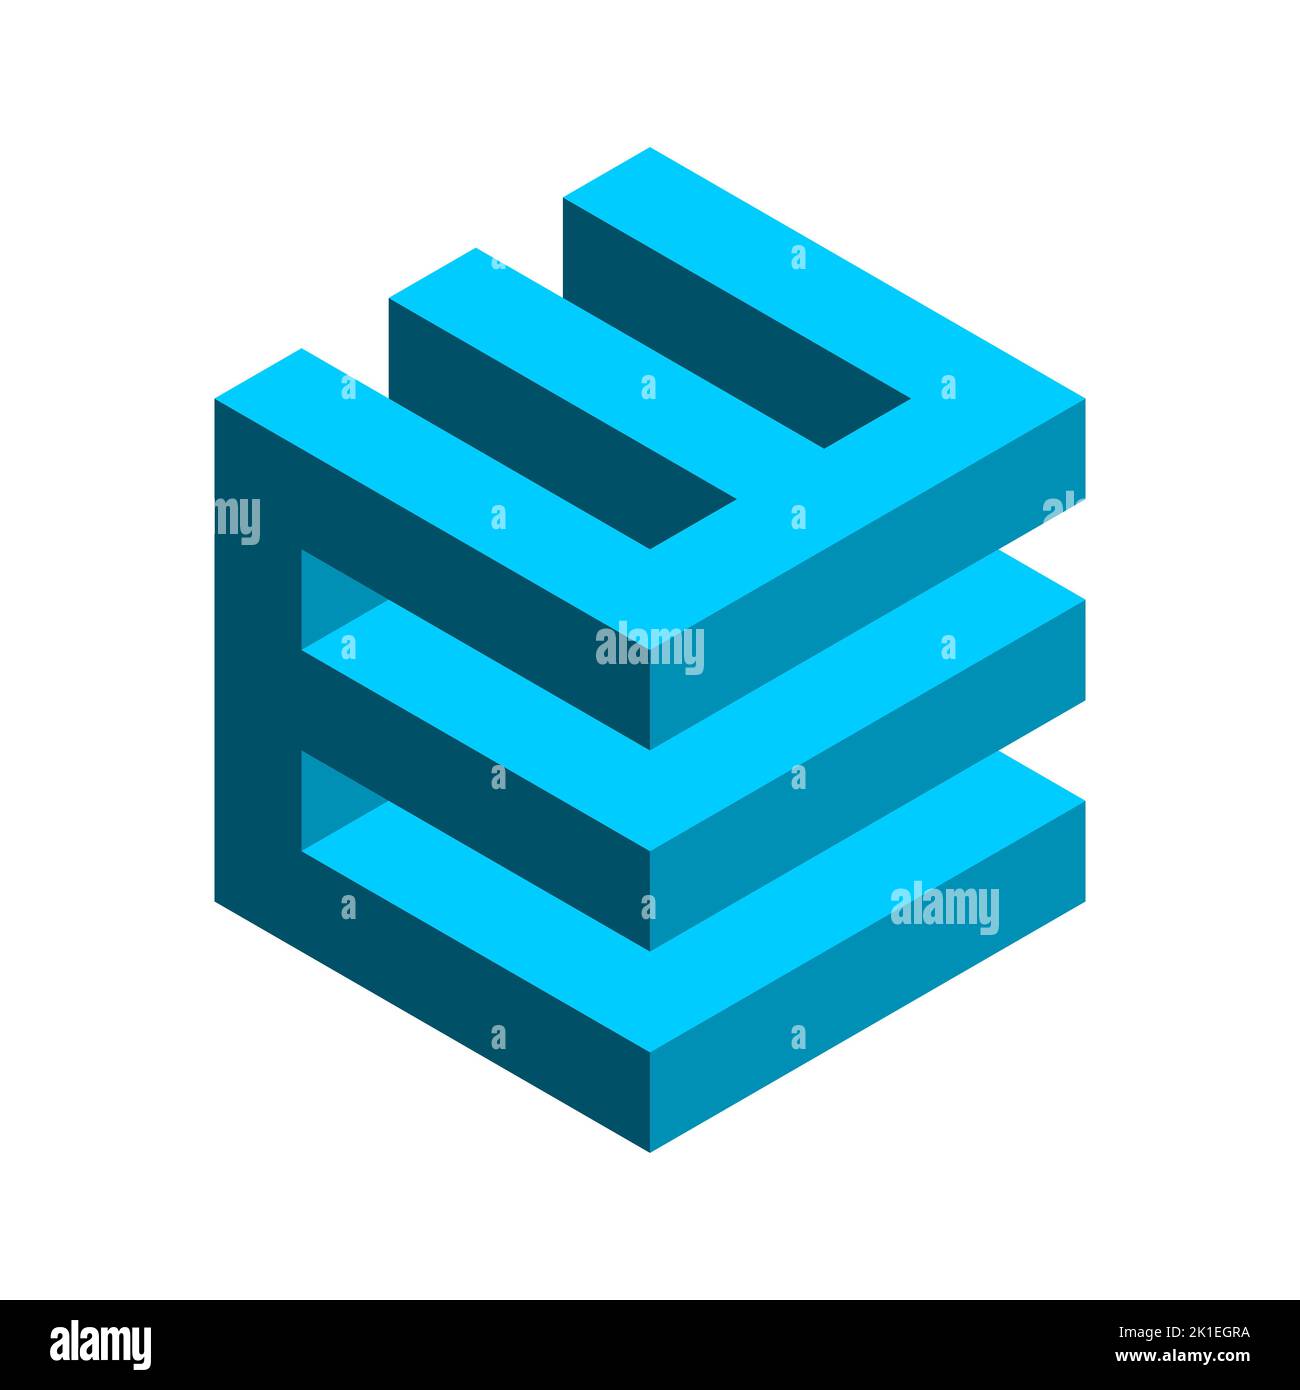 Triple E cube logo. 3D letter E cube. Blue geometric hexagon shape. Electronics industry concept. Three layers object. Construction and building Stock Vector